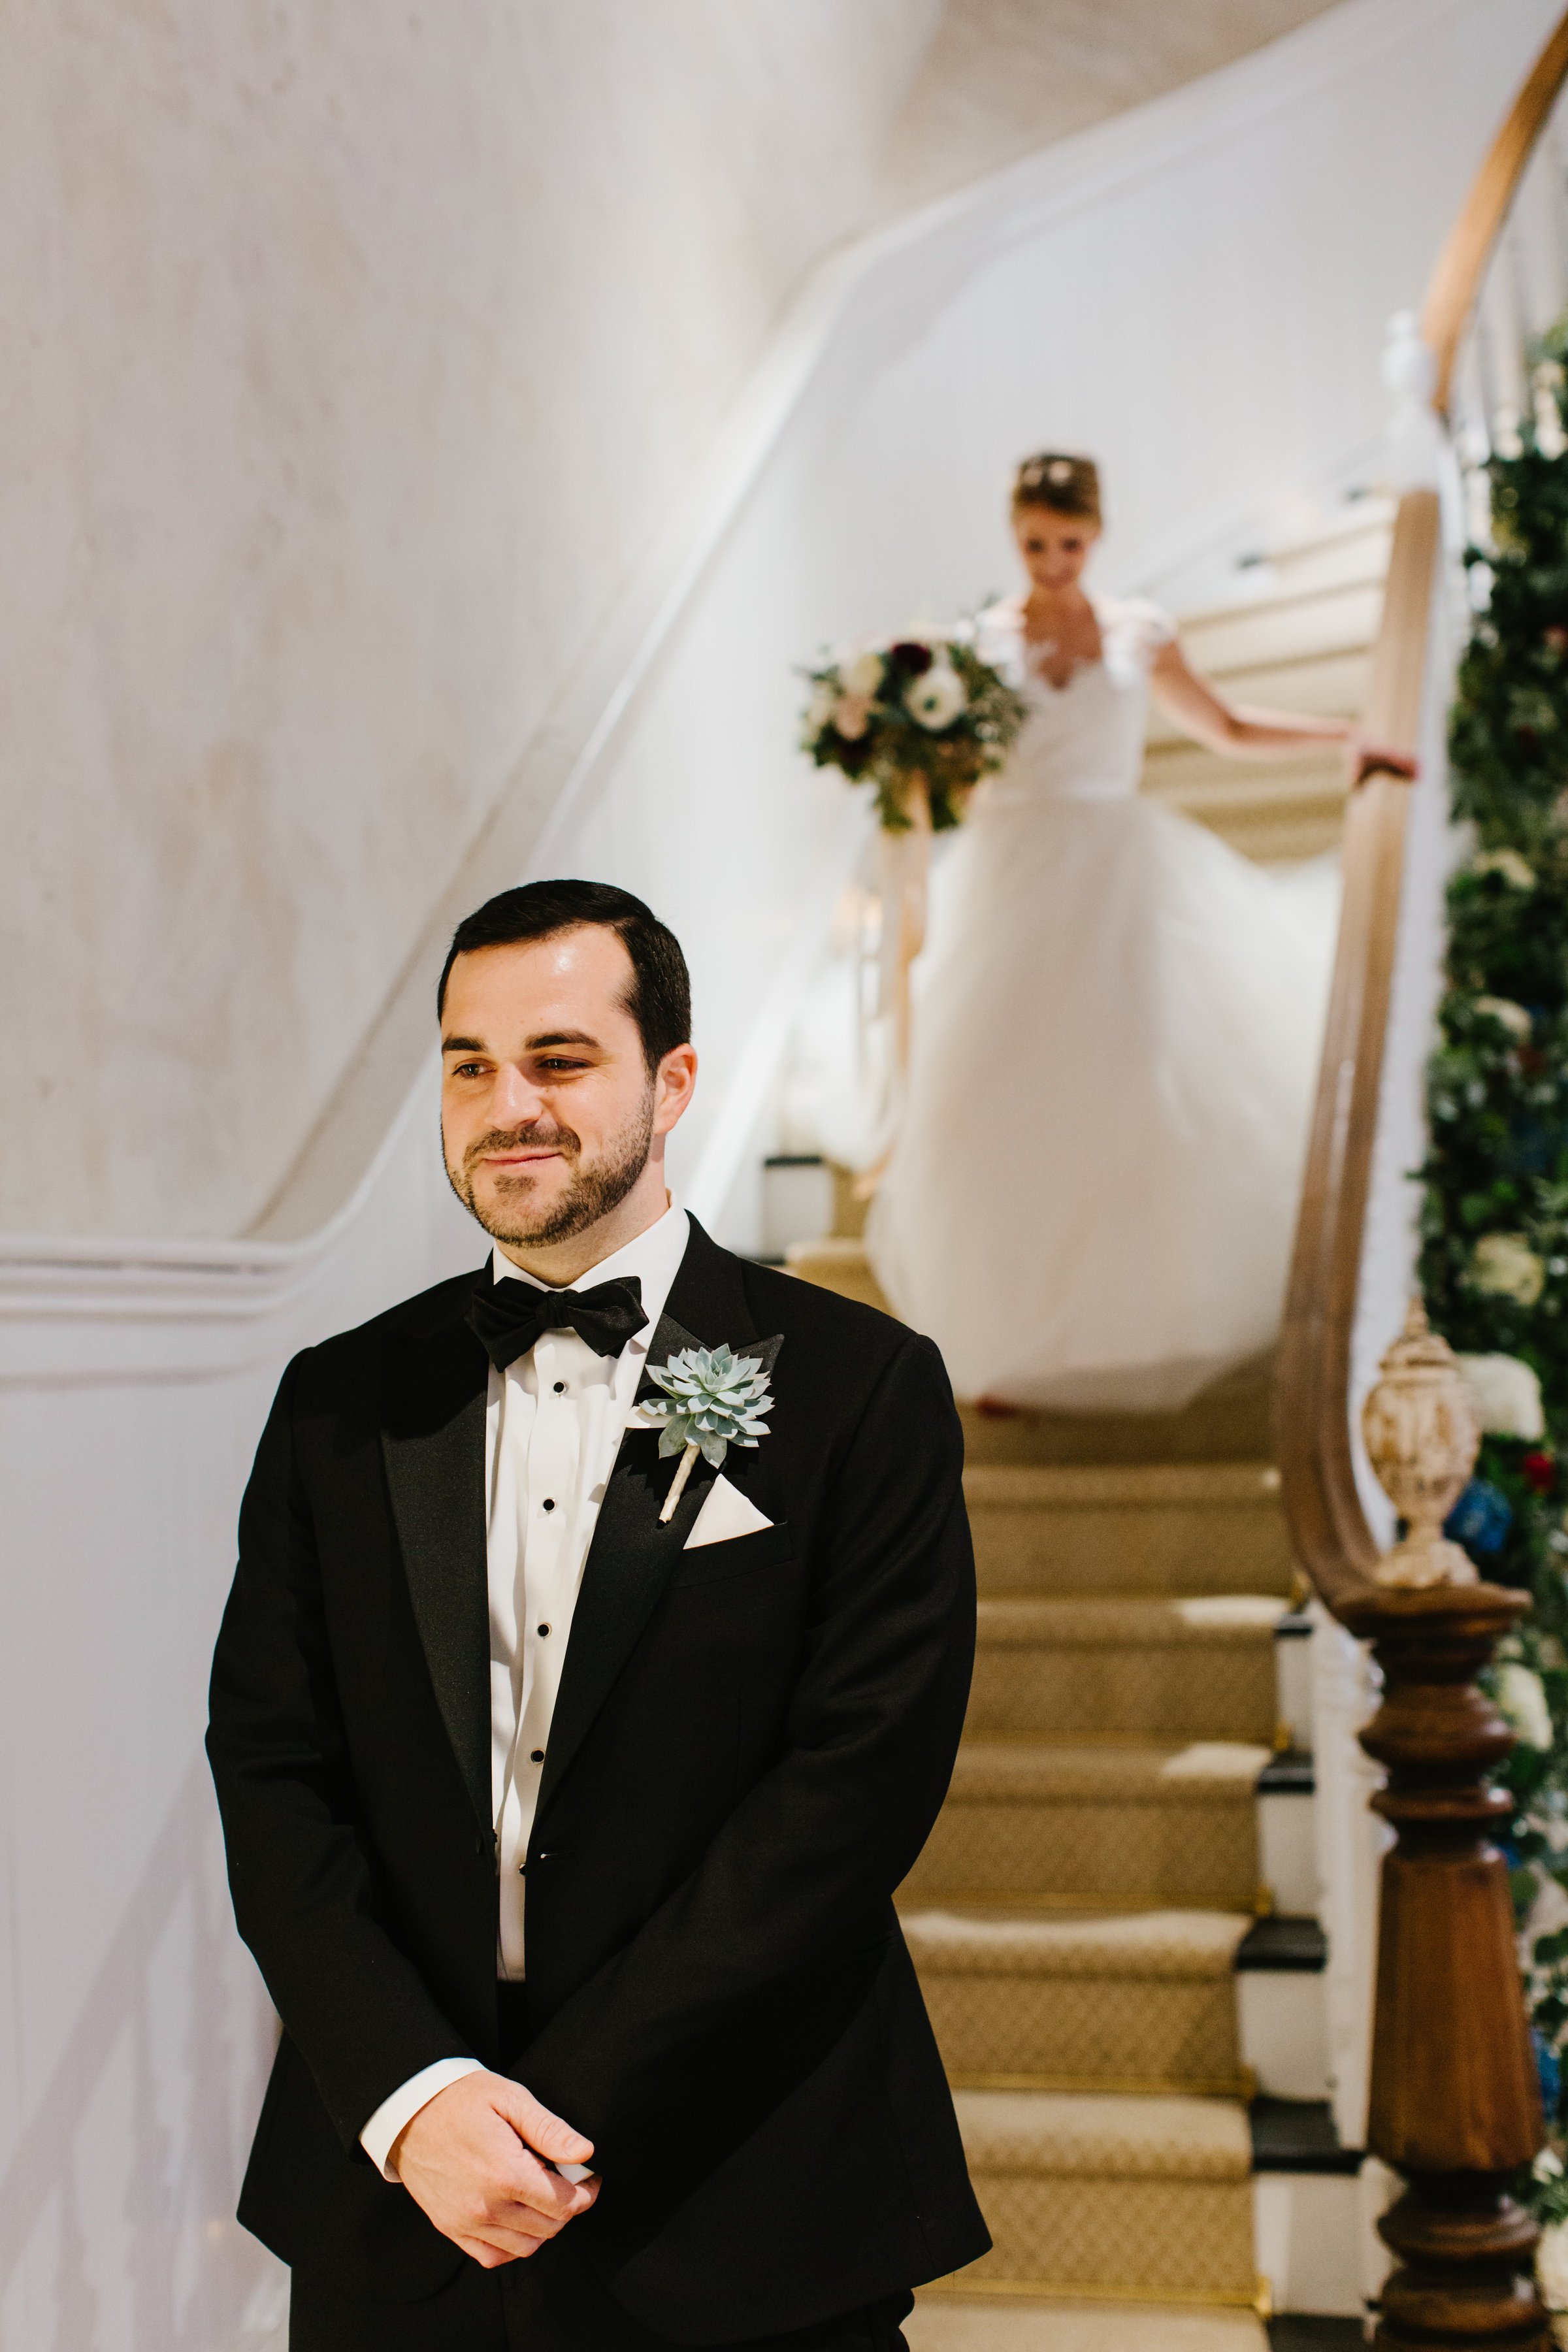 Groom waiting at bottom of grand staircase for bride